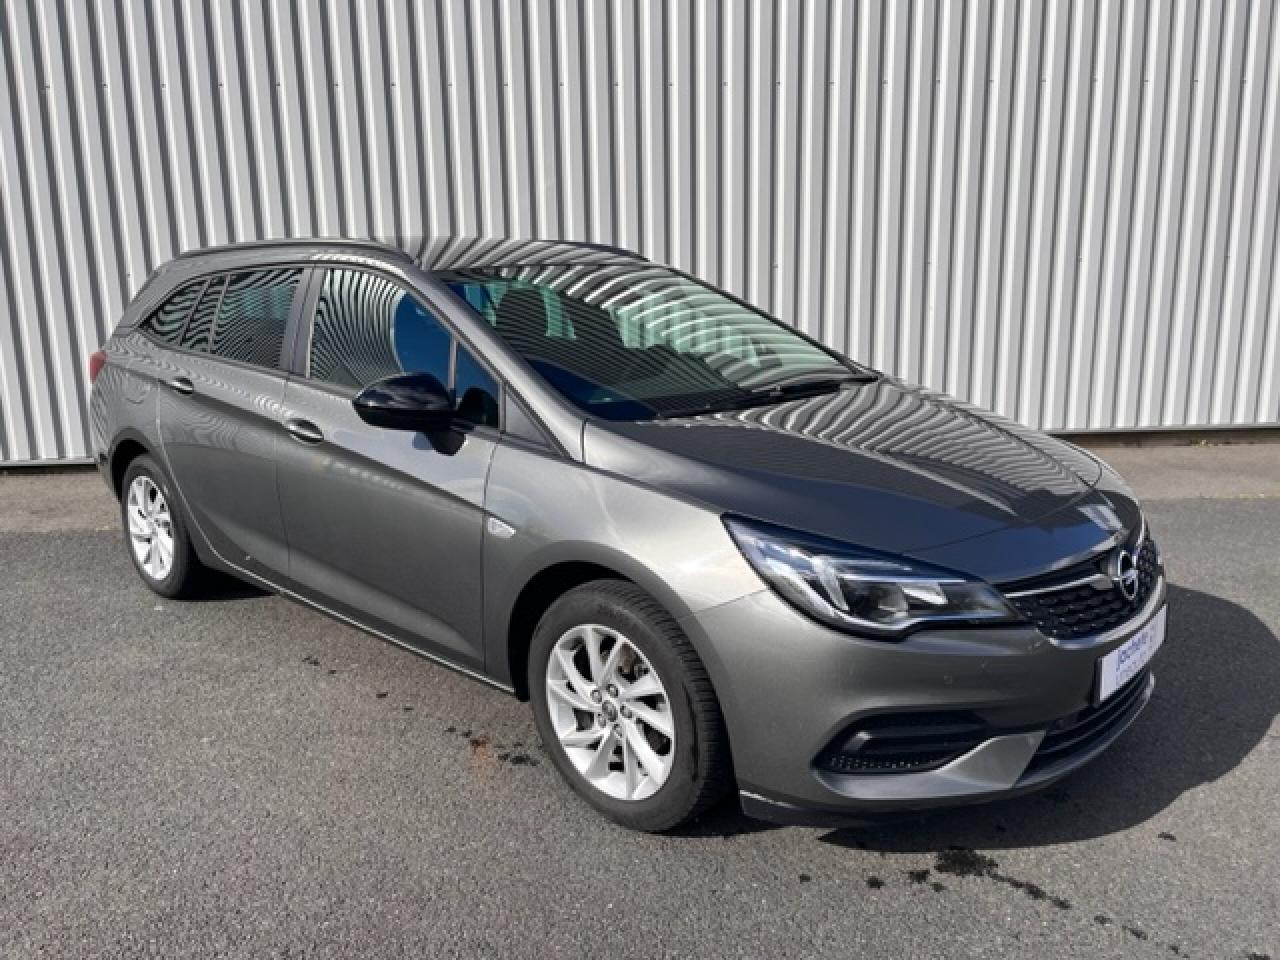 ACHAT VO - opel-ASTRA-Sports Tourer 1.2i 110 Edition